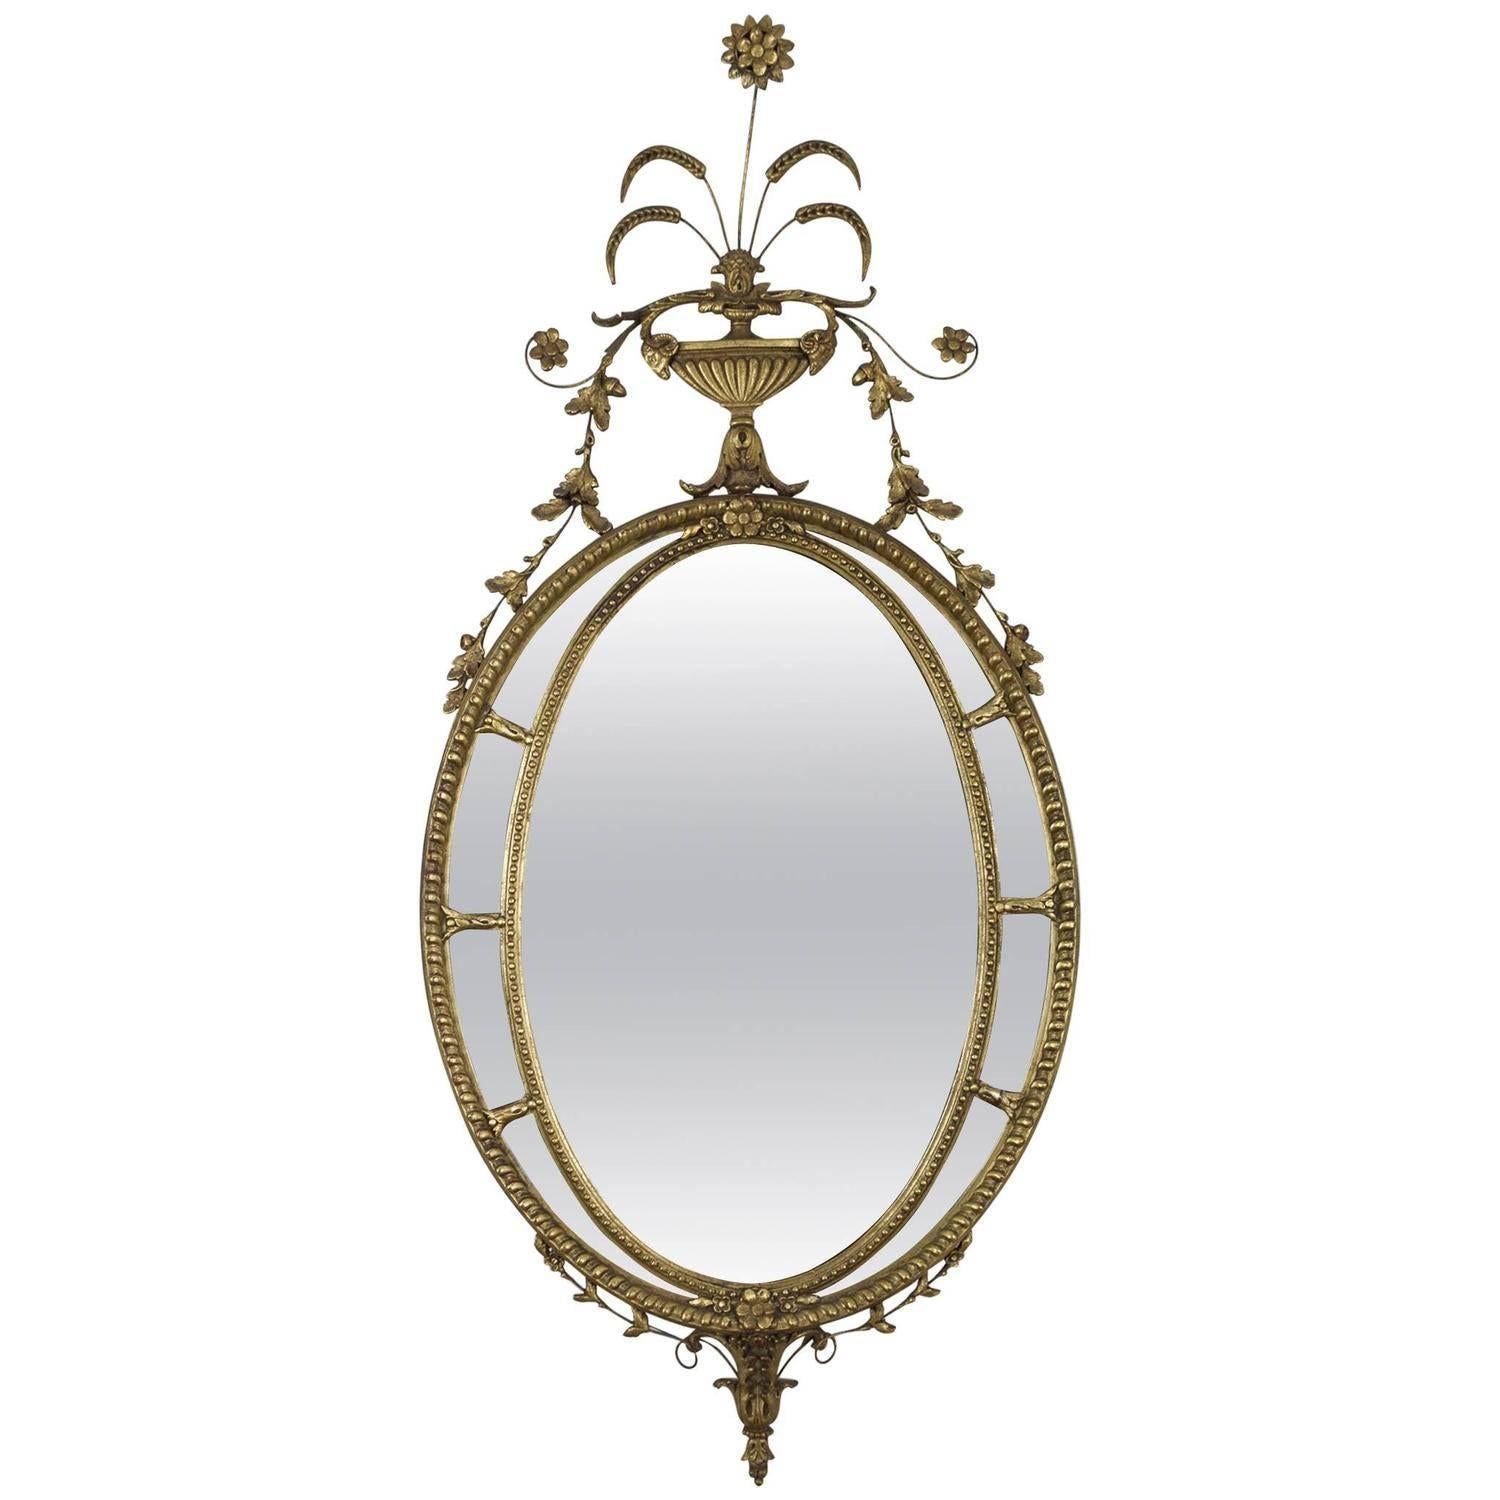 1940's Oval Neoclassical Giltwood Mirror